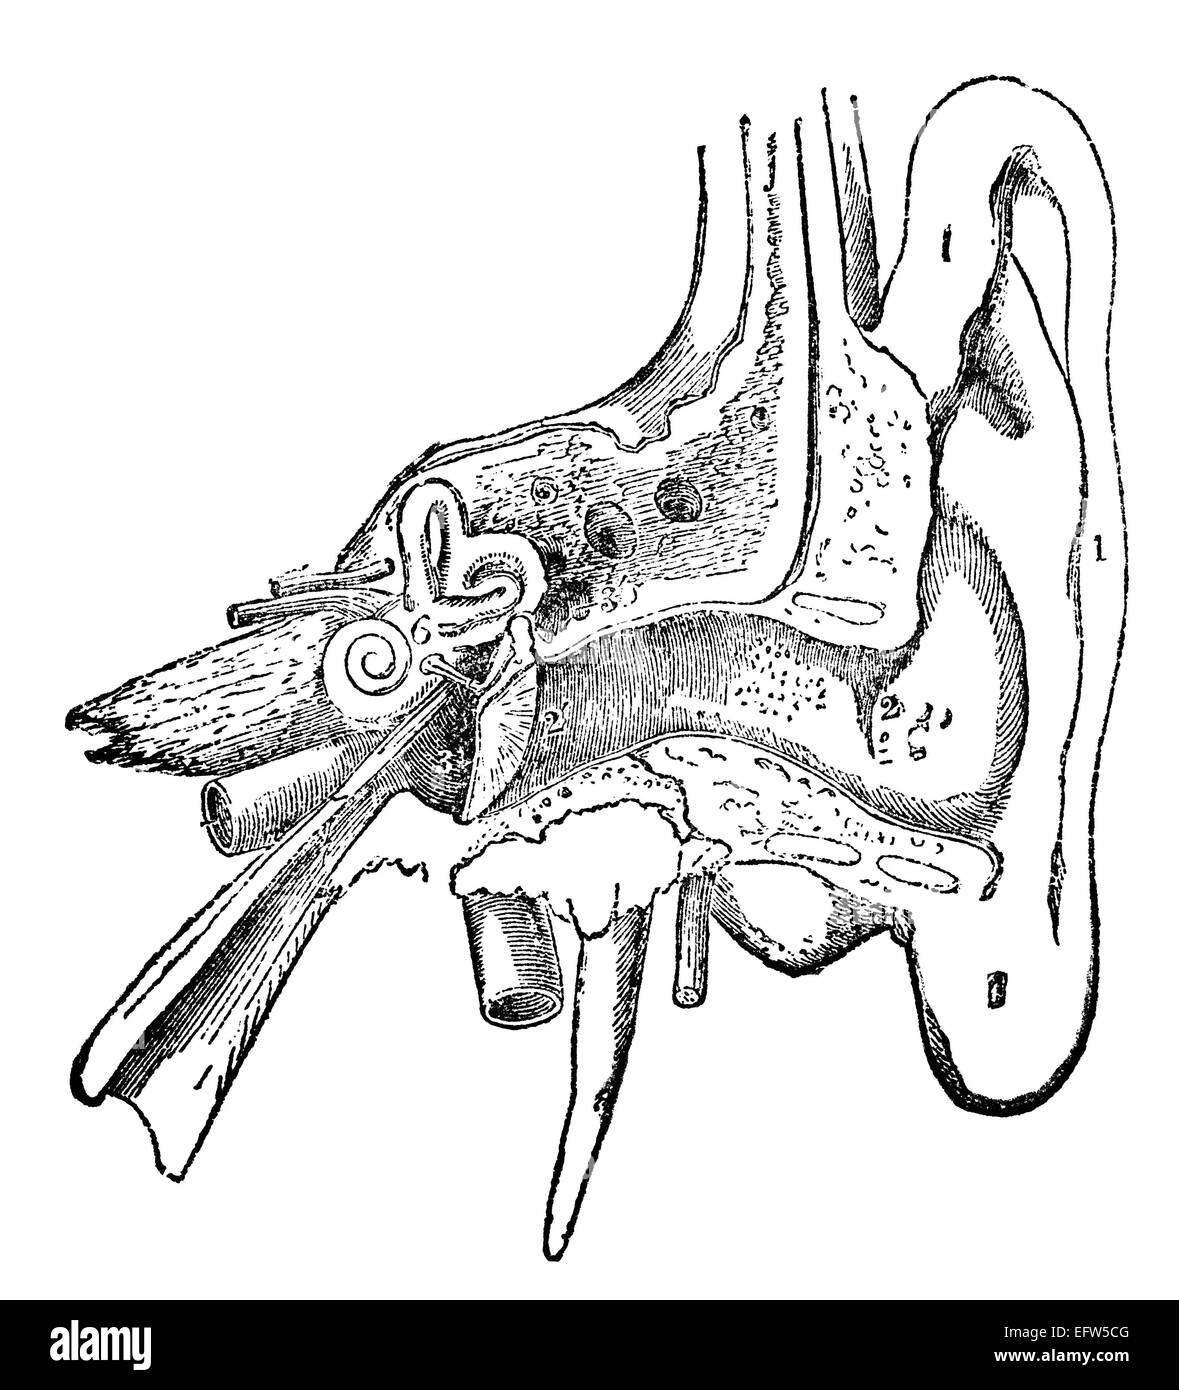 Victorian engraving of a human ear. Digitally restored image from a mid-19th century Encyclopaedia. Stock Photo